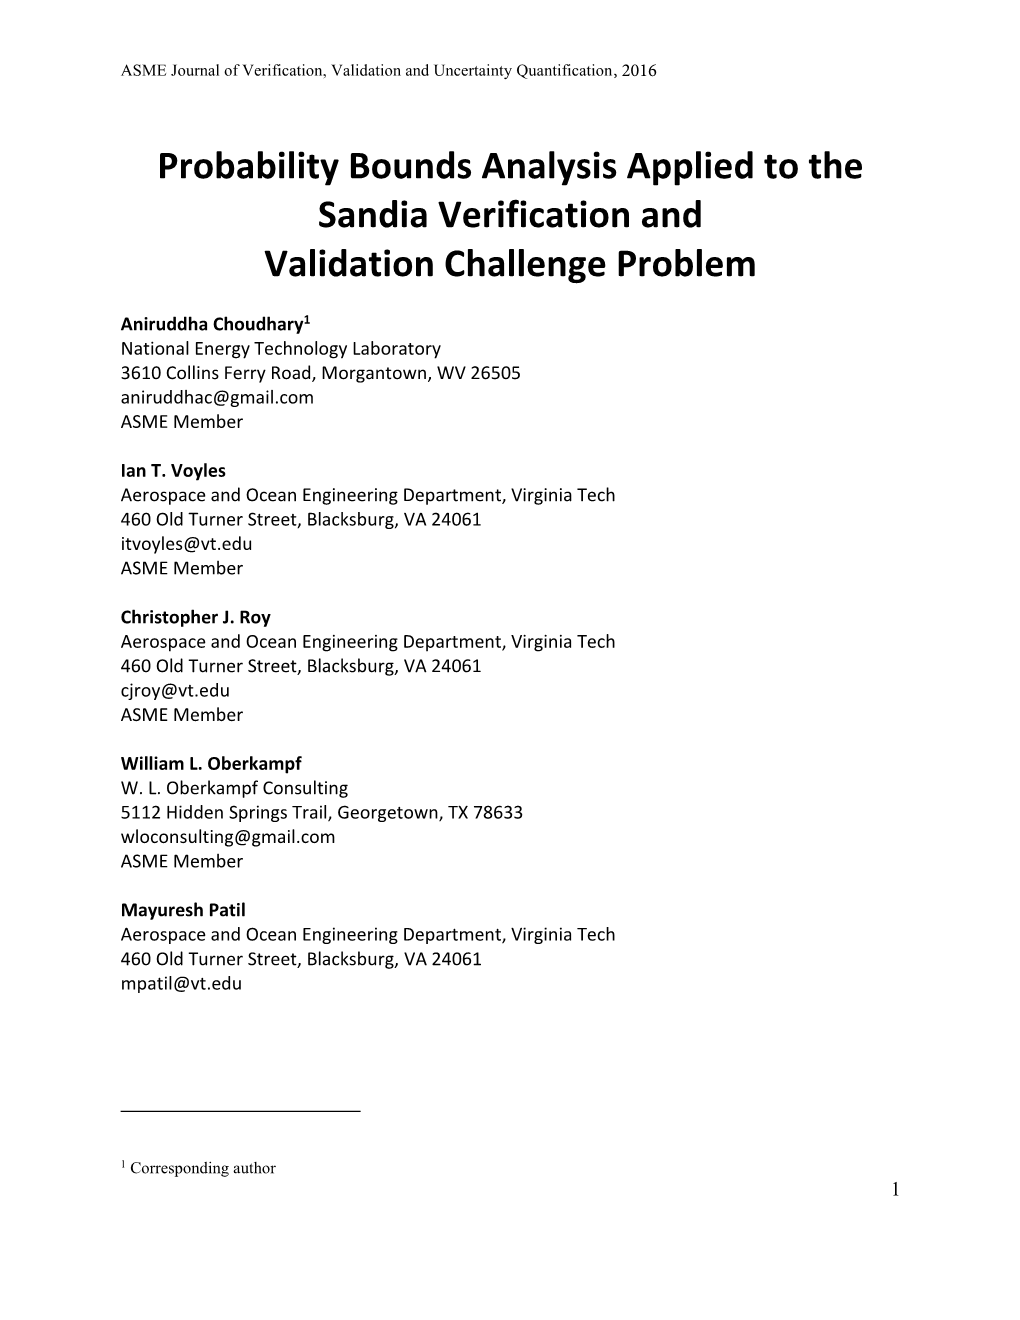 Probability Bounds Analysis Applied to the Sandia Verification and Validation Challenge Problem